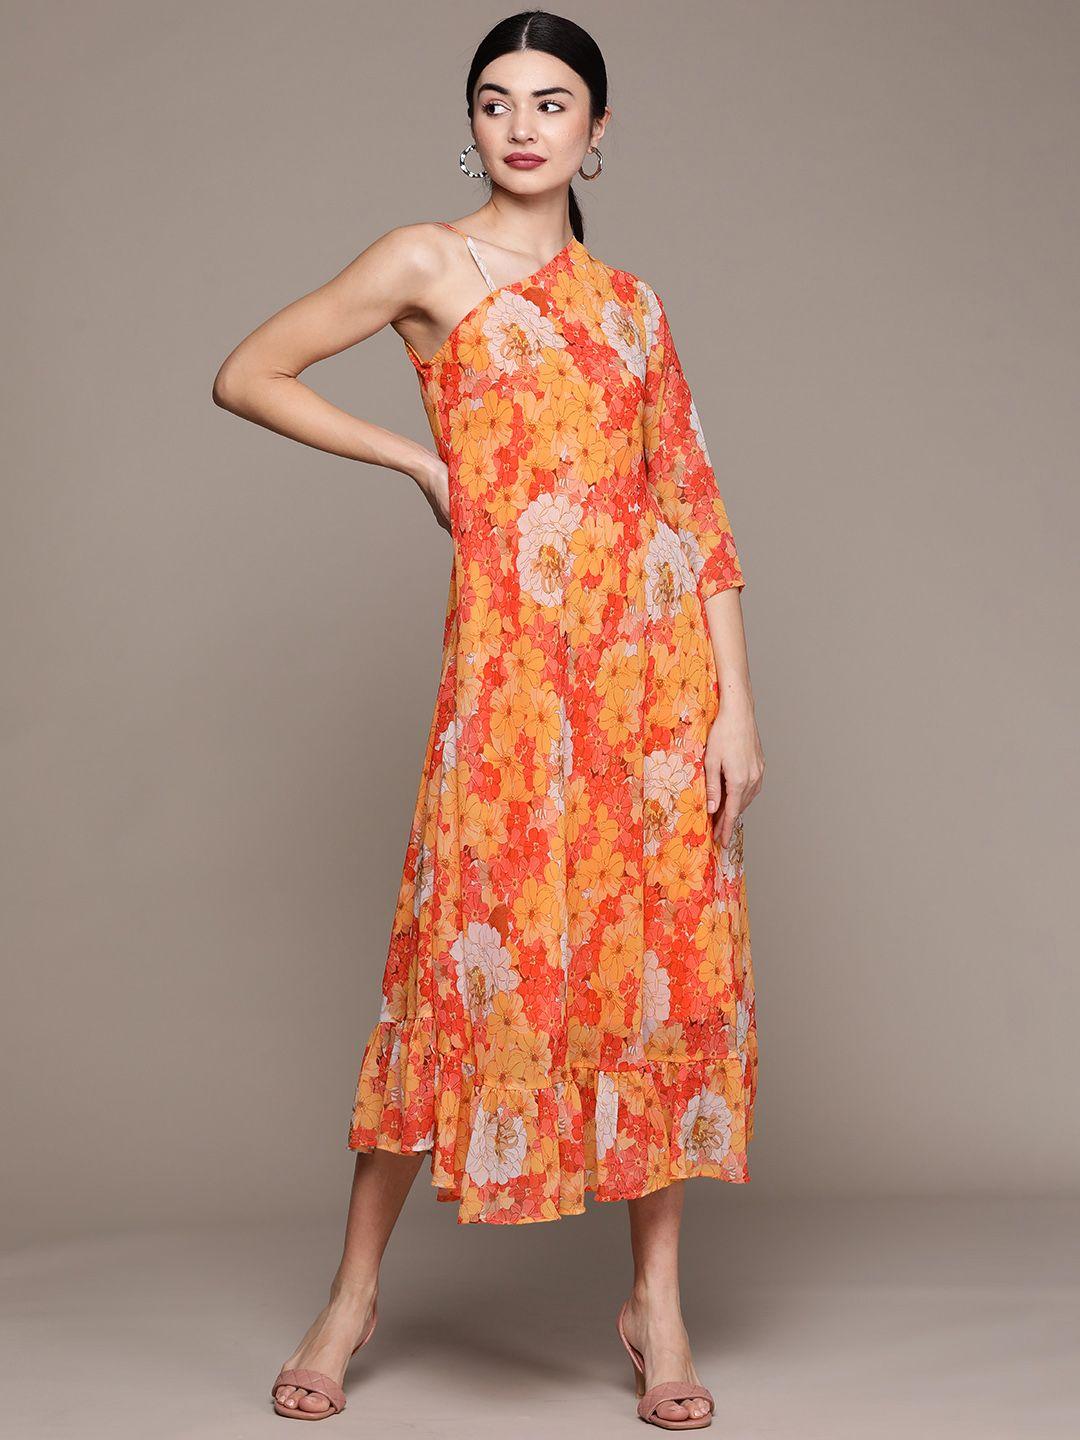 ziyaa-mustard-yellow-&-orange-floral-printed-one-shoulder-georgette-fit-&-flare-maxi-dress